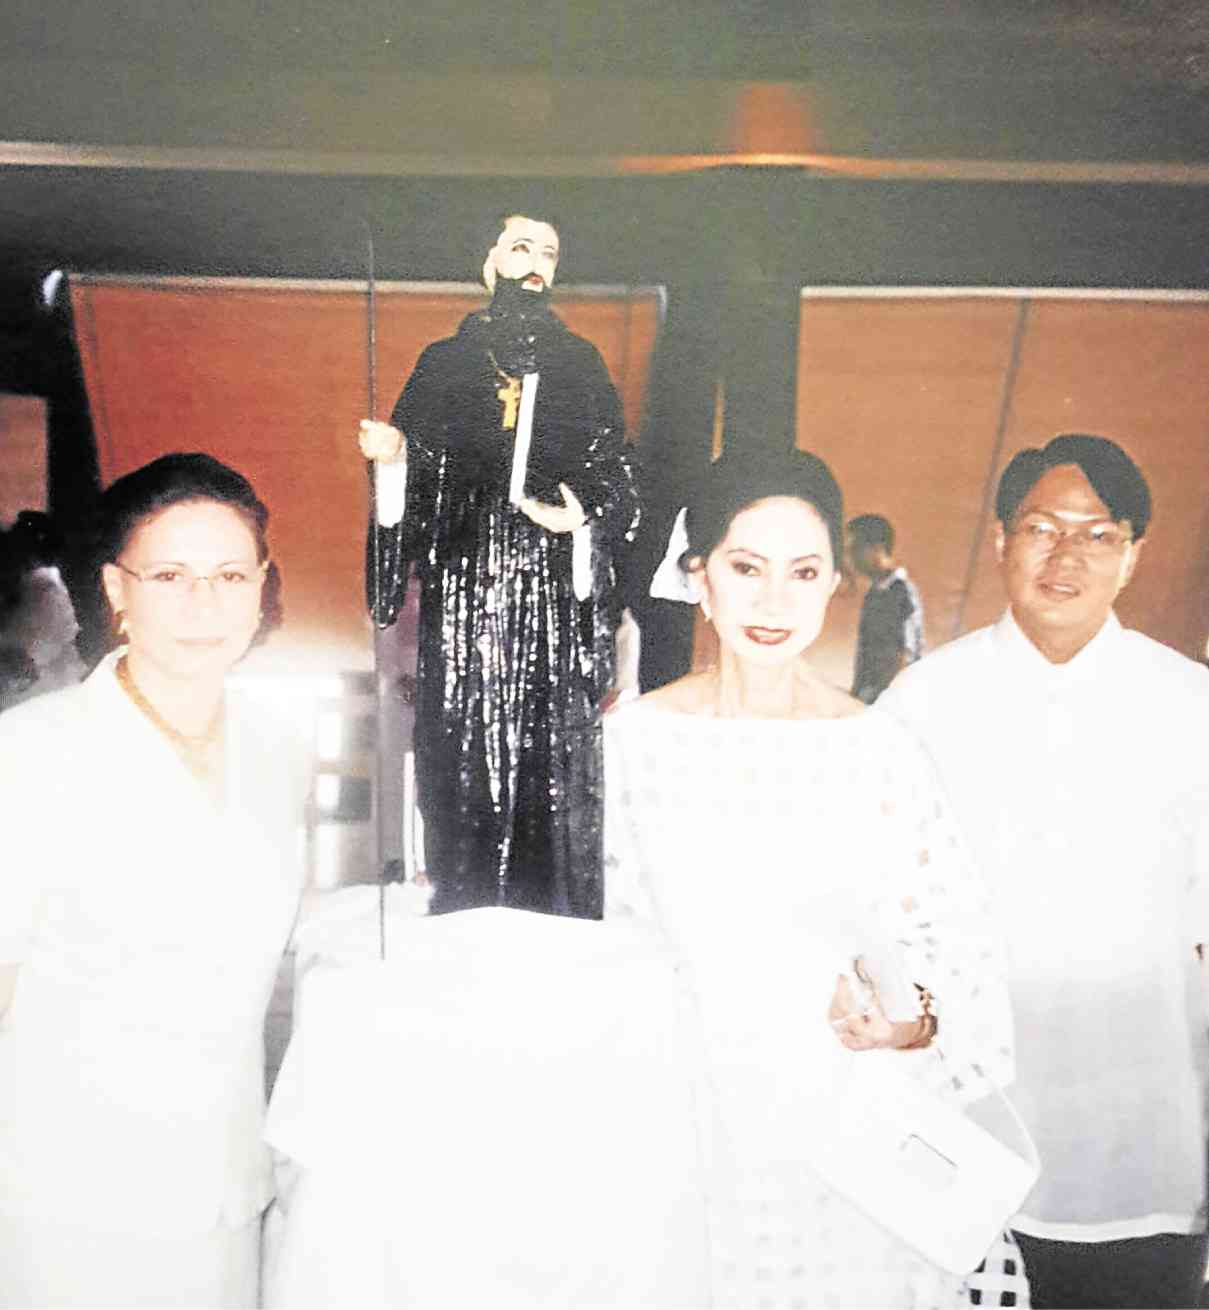 DURING the celebration of the Centennial of Benedictine Presence in the Philippines, Meldy Cojuangco (middle), with Mercy Tuason, who would become ambassador to the Vatican, and fashion designer Bobby Novenario, beside the century-old image of St. Benedict